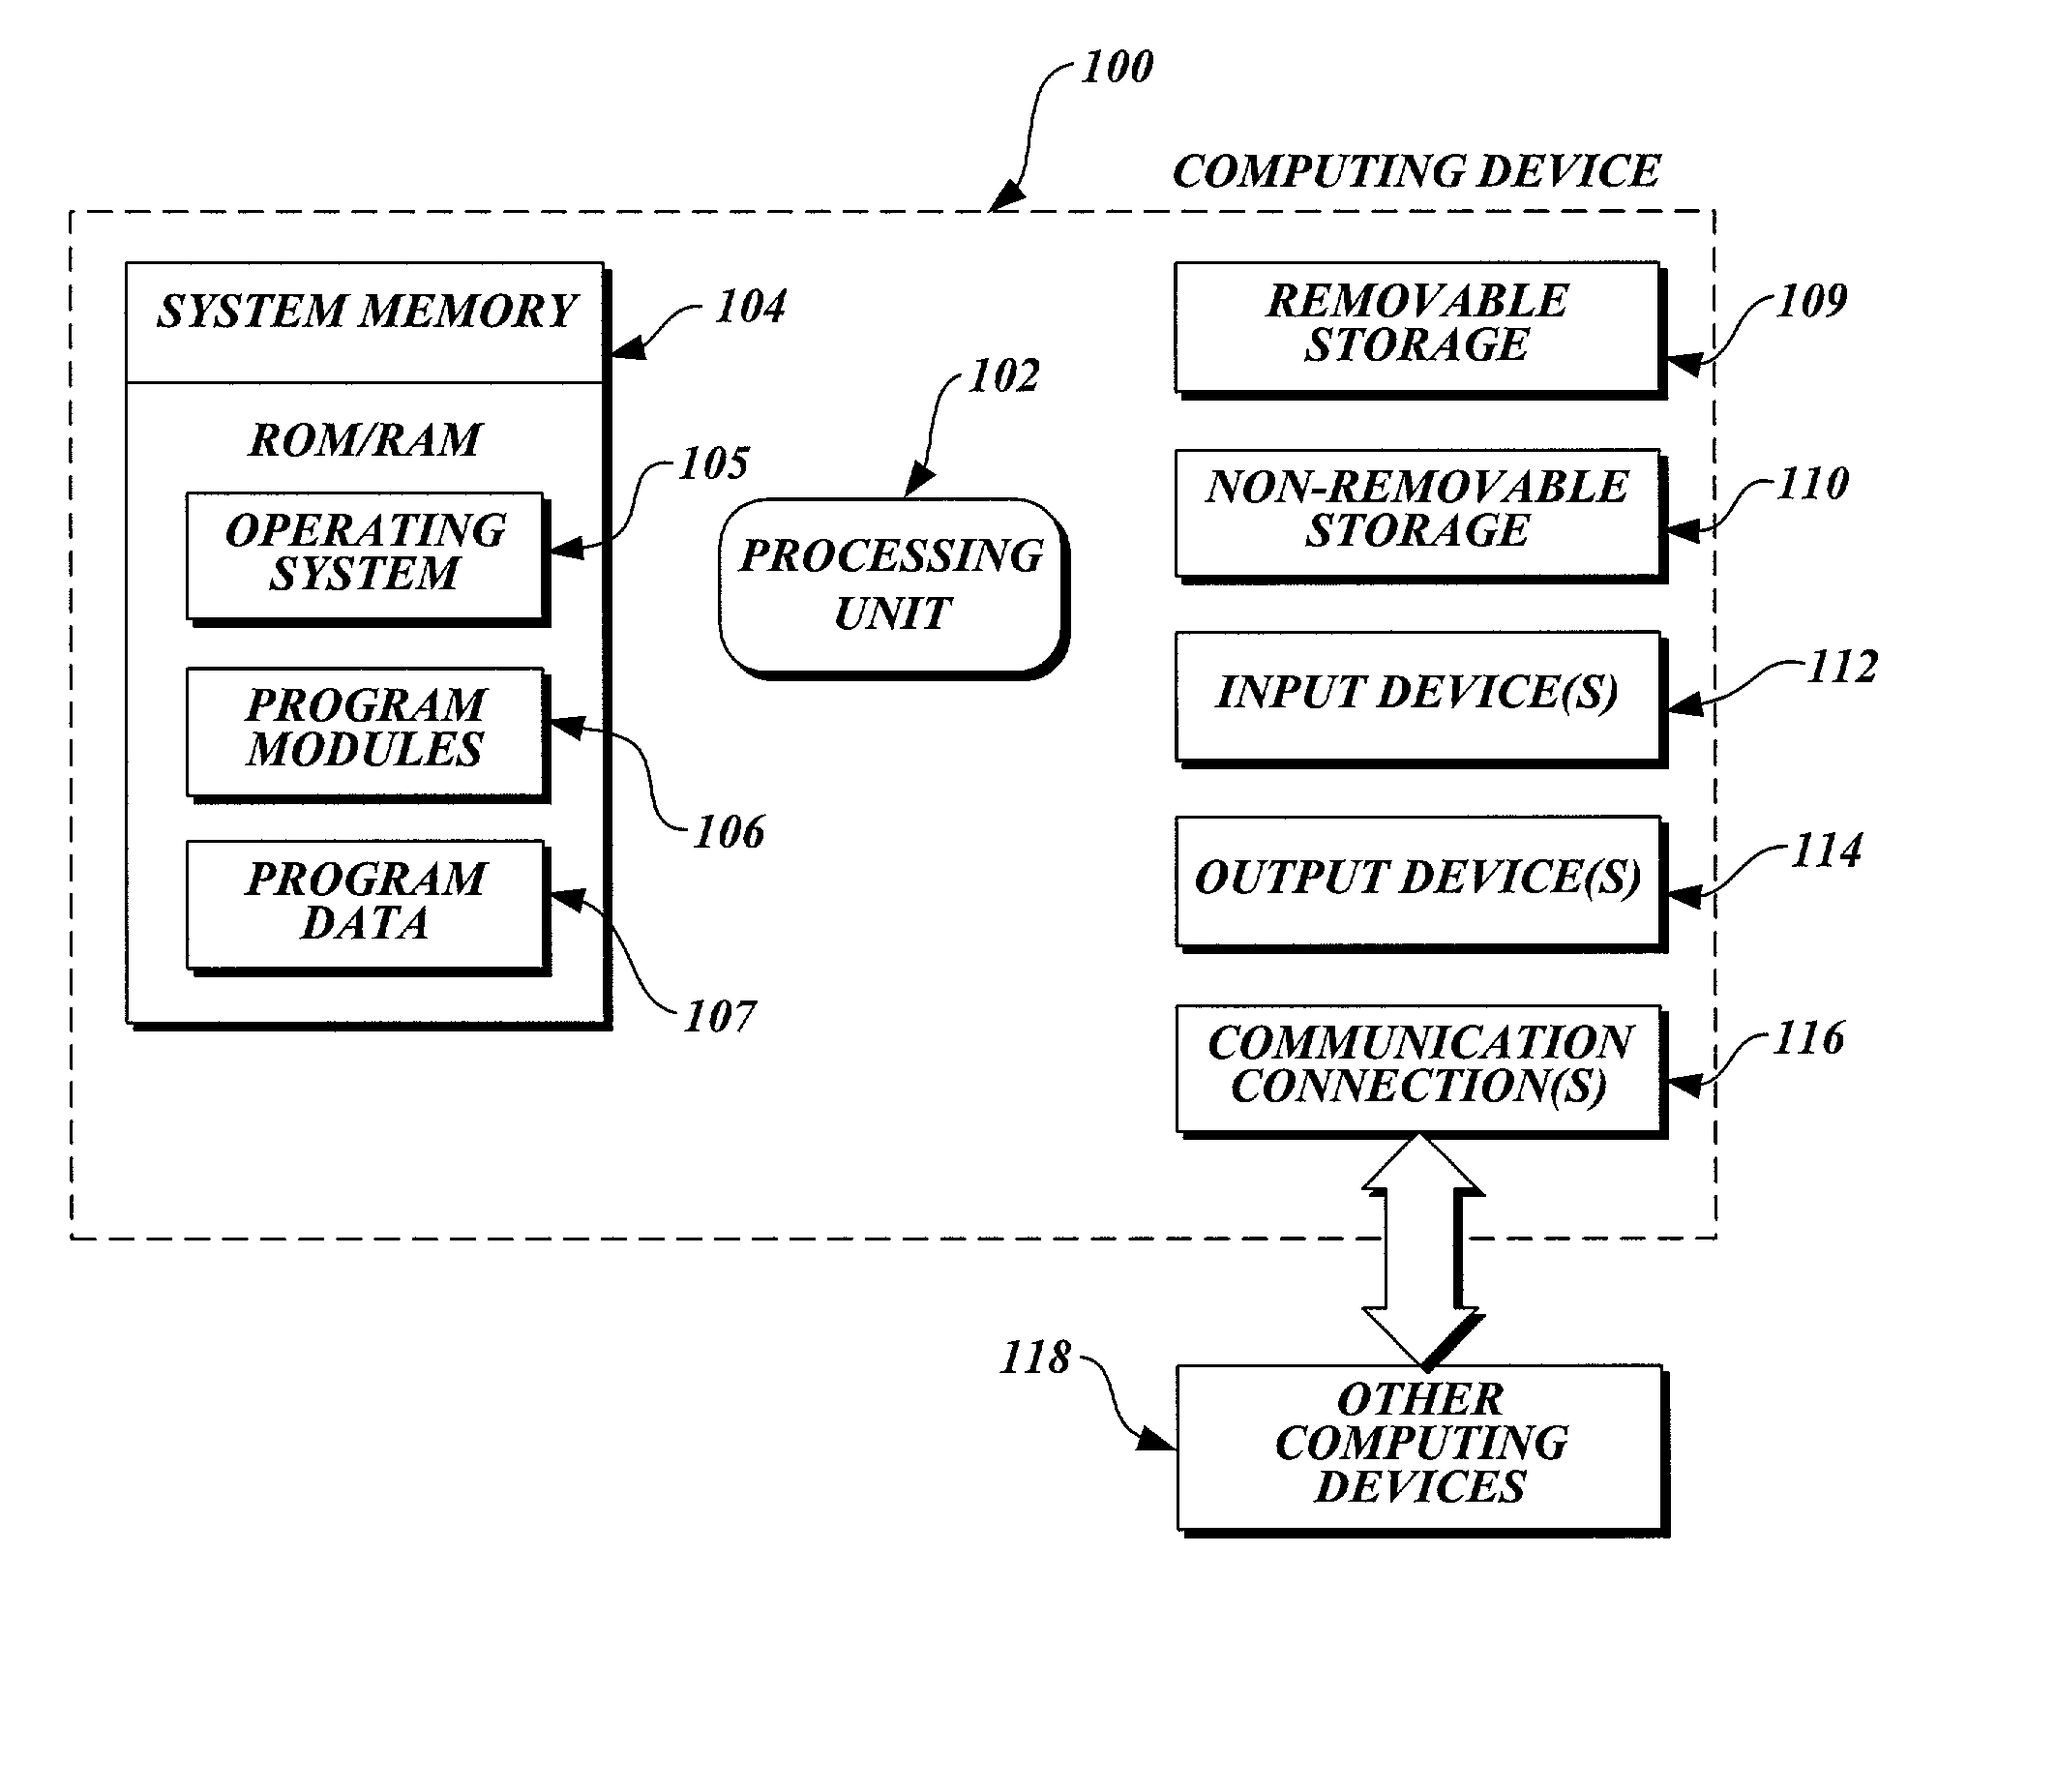 Method and system for rewriting unwind data in the presence of exceptions